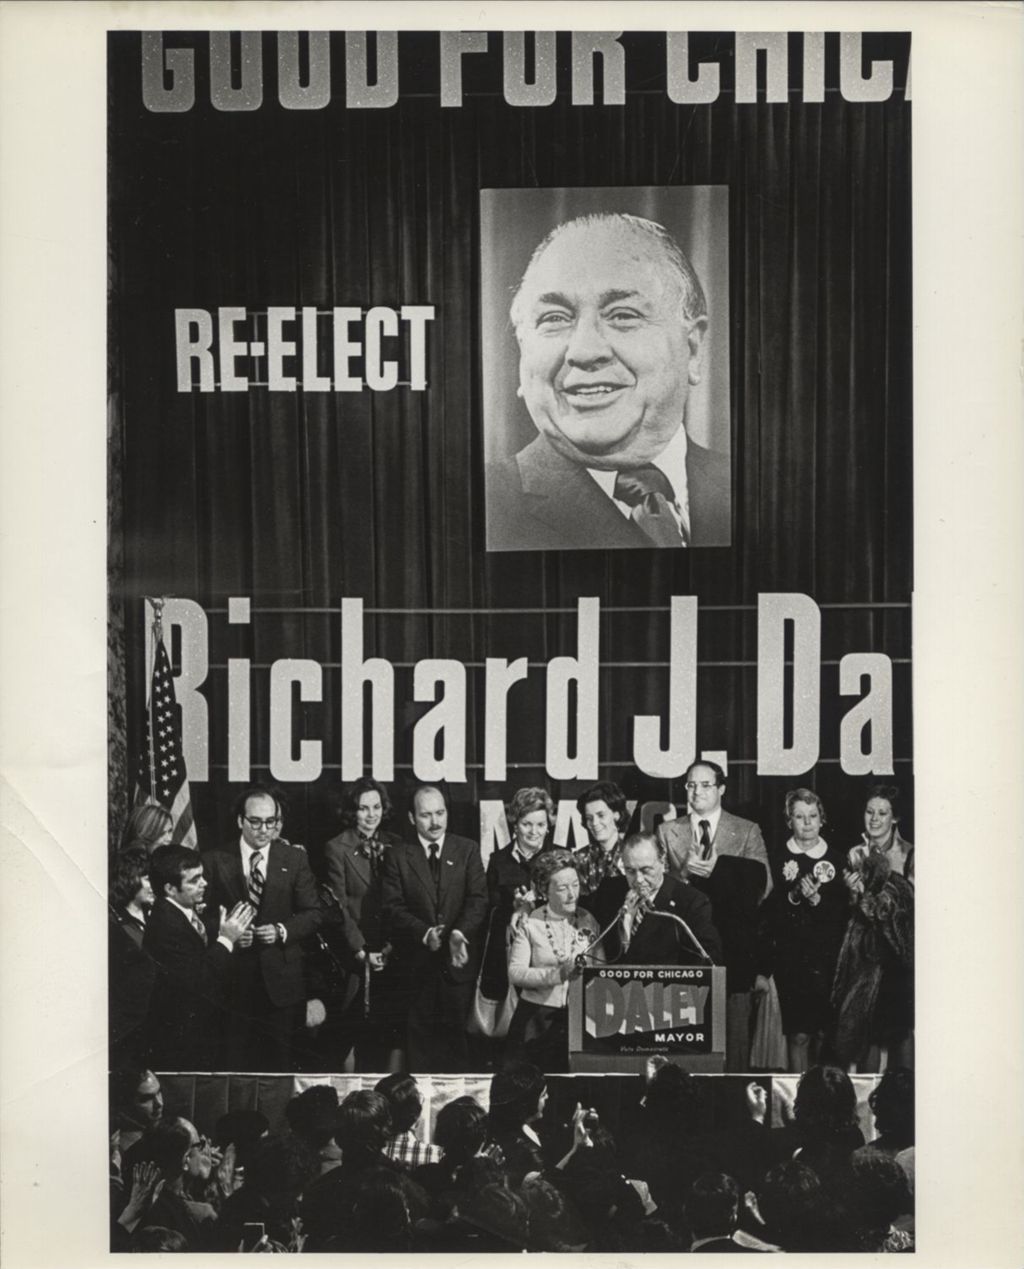 Miniature of Eleanor Daley and Richard J. Daley at a podium on election night